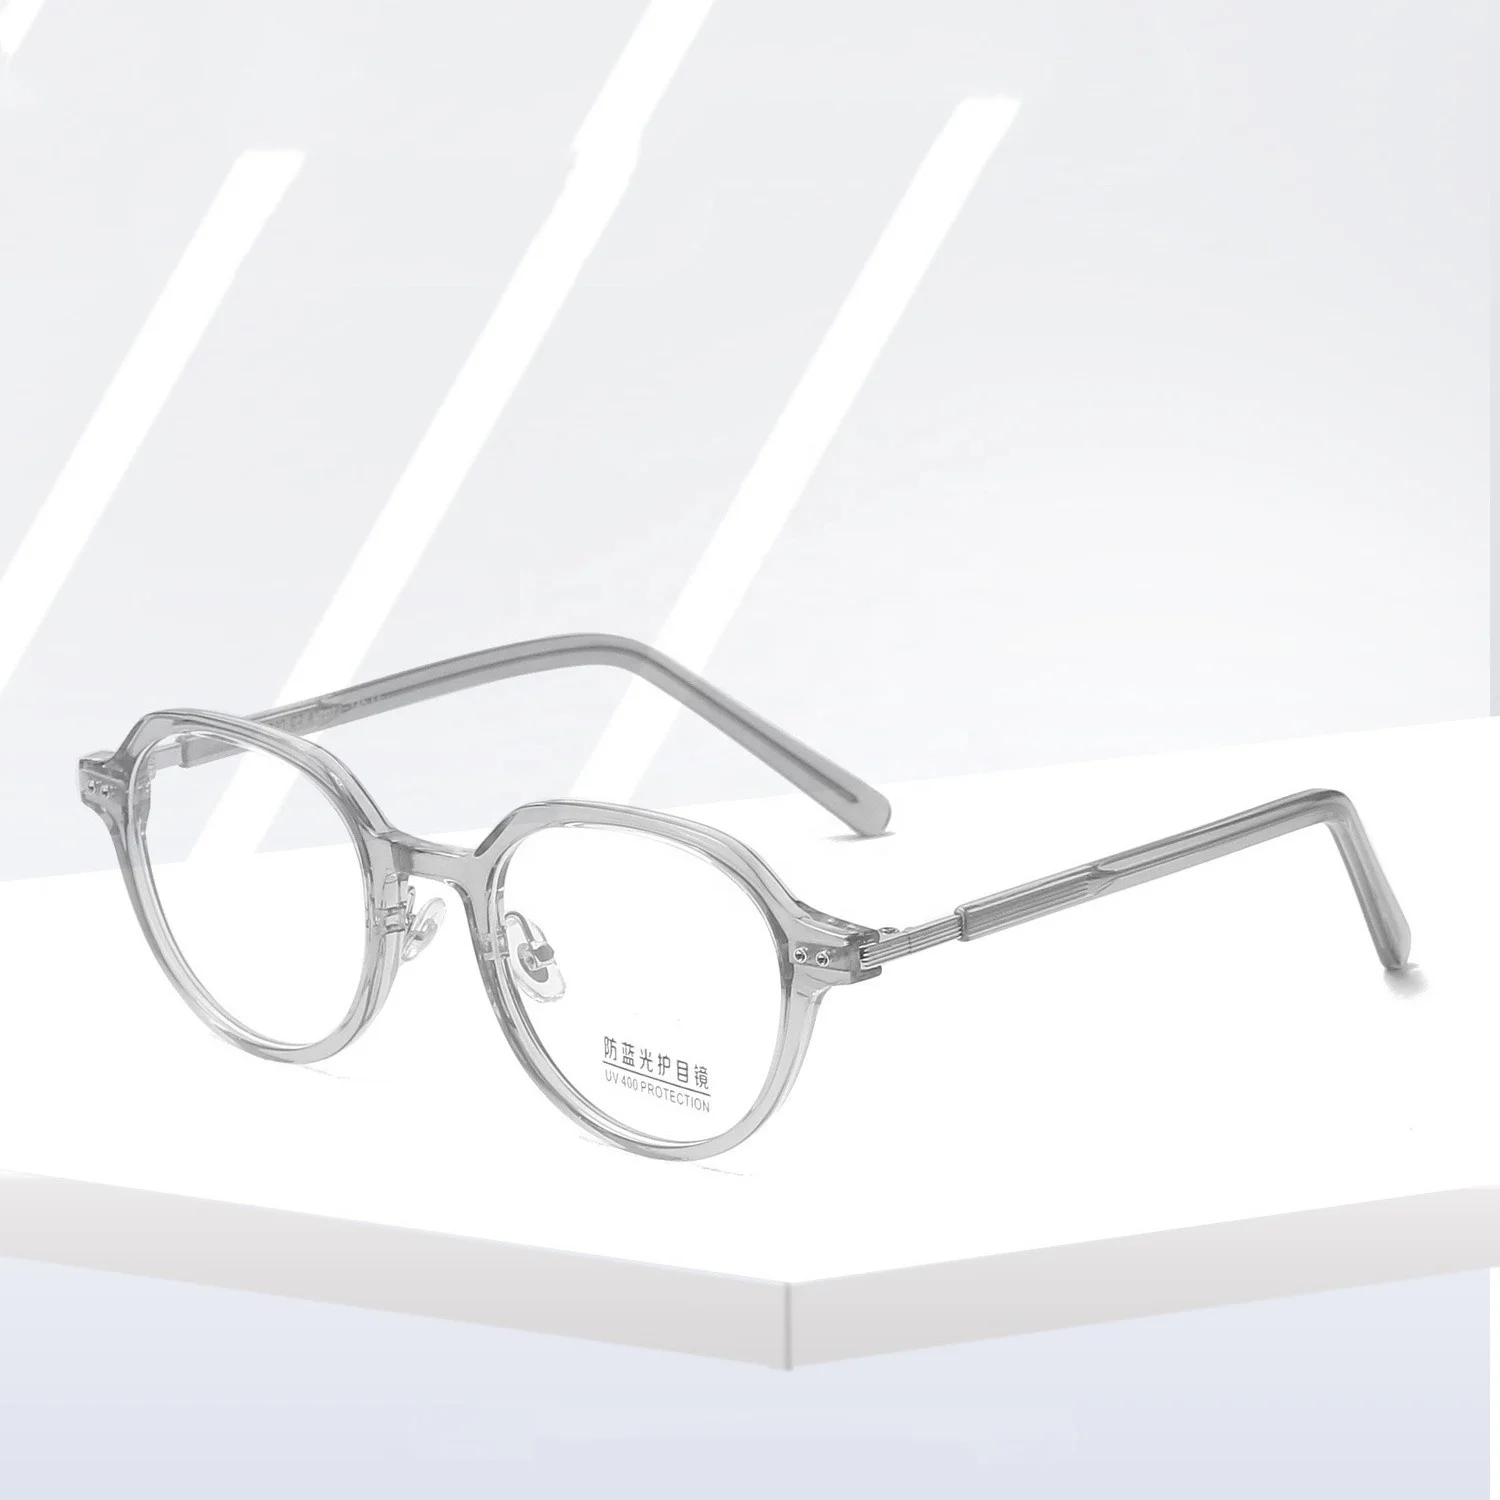 

Jiuling eyewear high quality acetate legs spring metal hinge plain spectacles polygon tr90 frame river glasses for all face, Mix color or custom colors